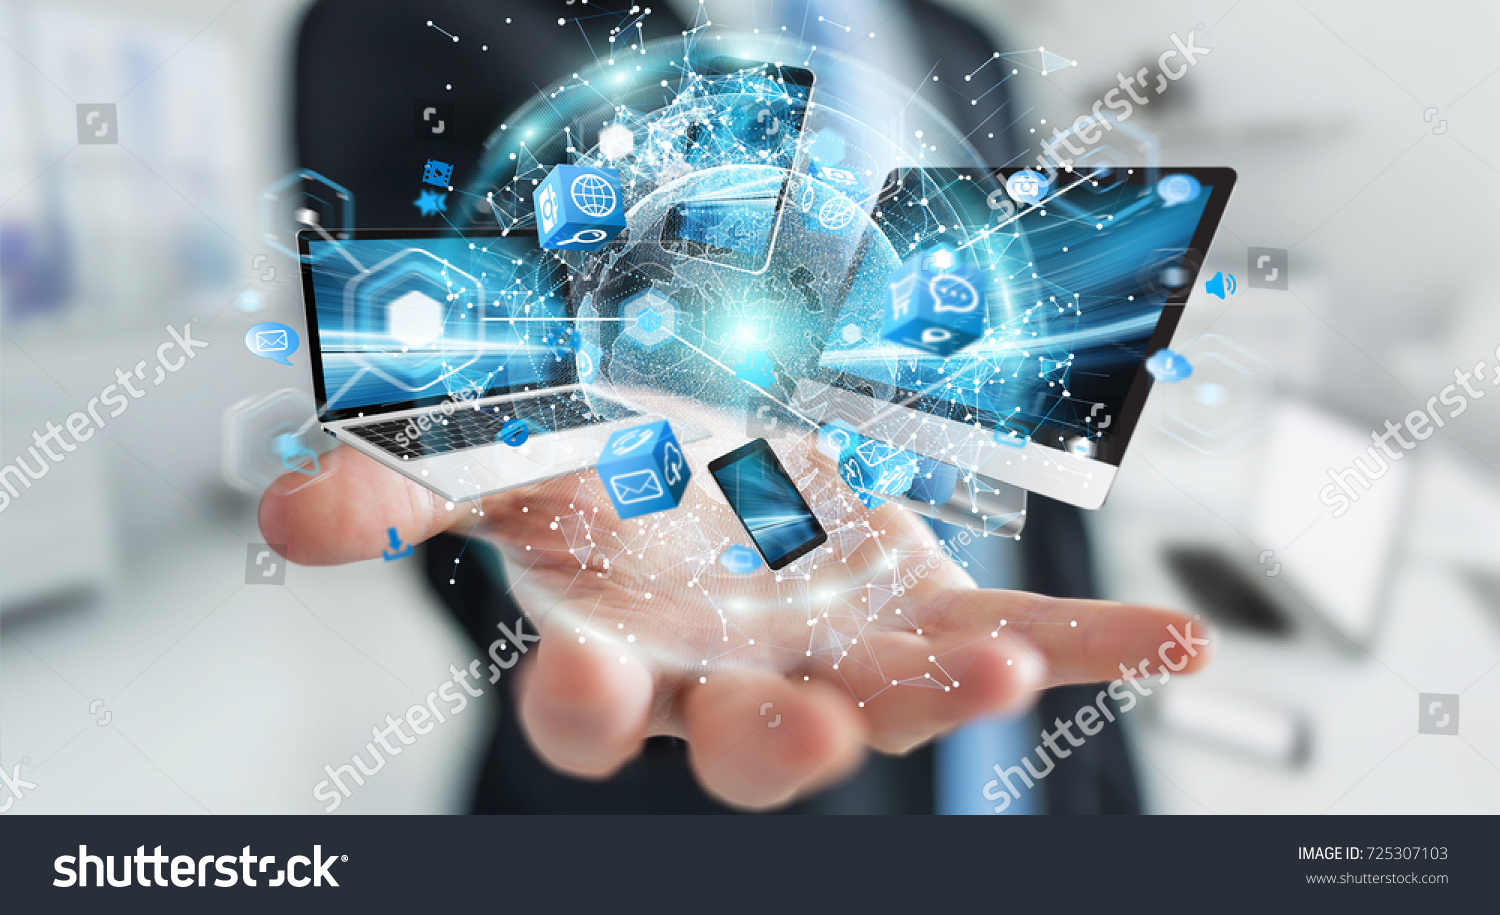 Tech devices connected to each other by businessman on blurred background 3D rendering #725307103